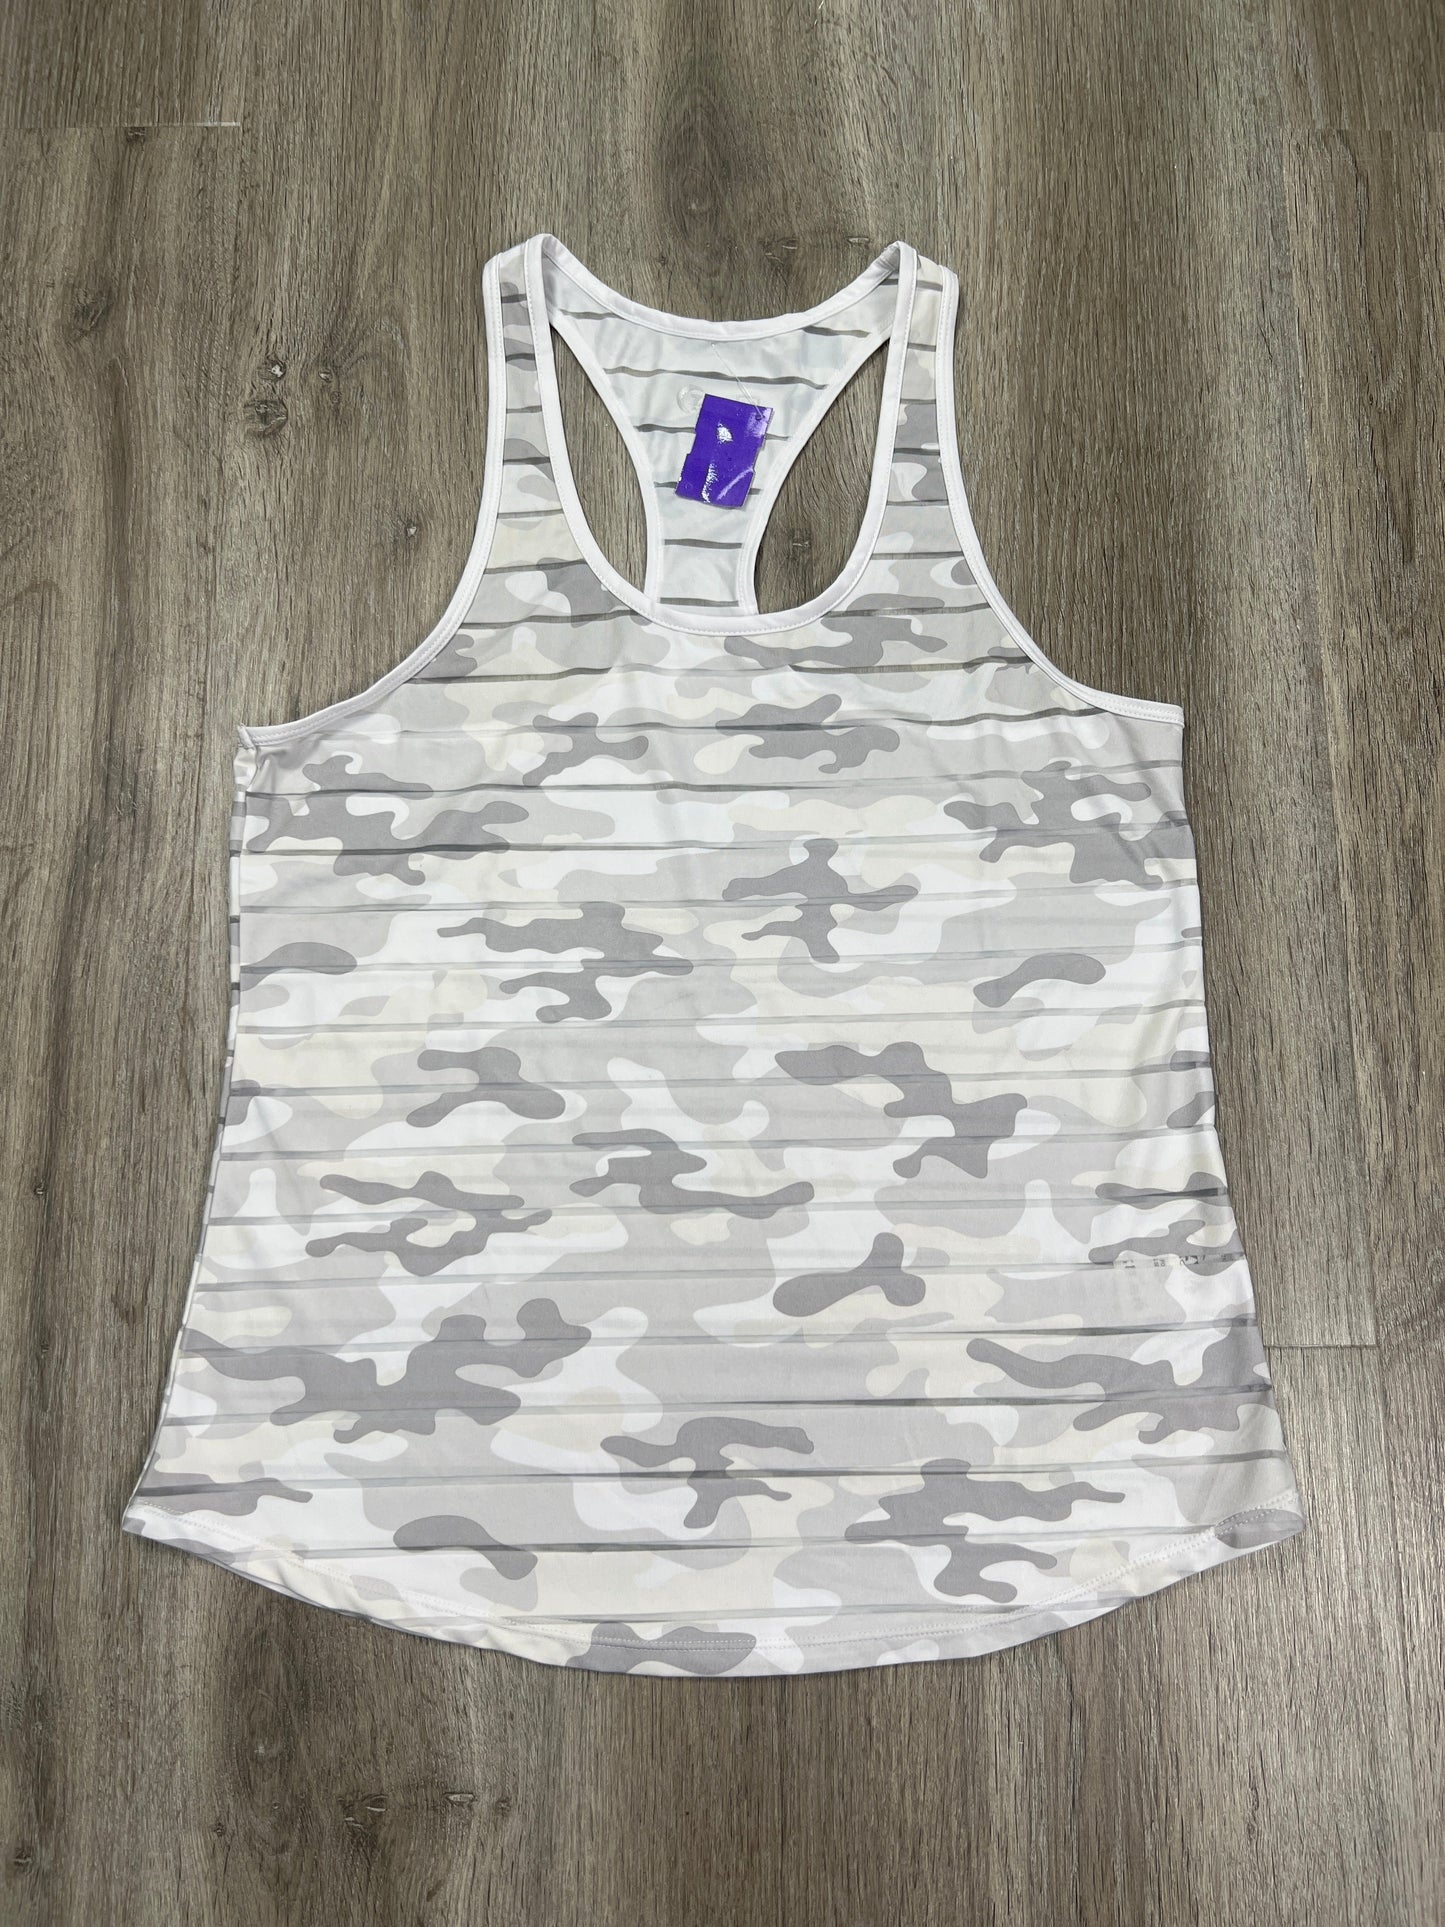 Athletic Tank Top By Zyia  Size: M